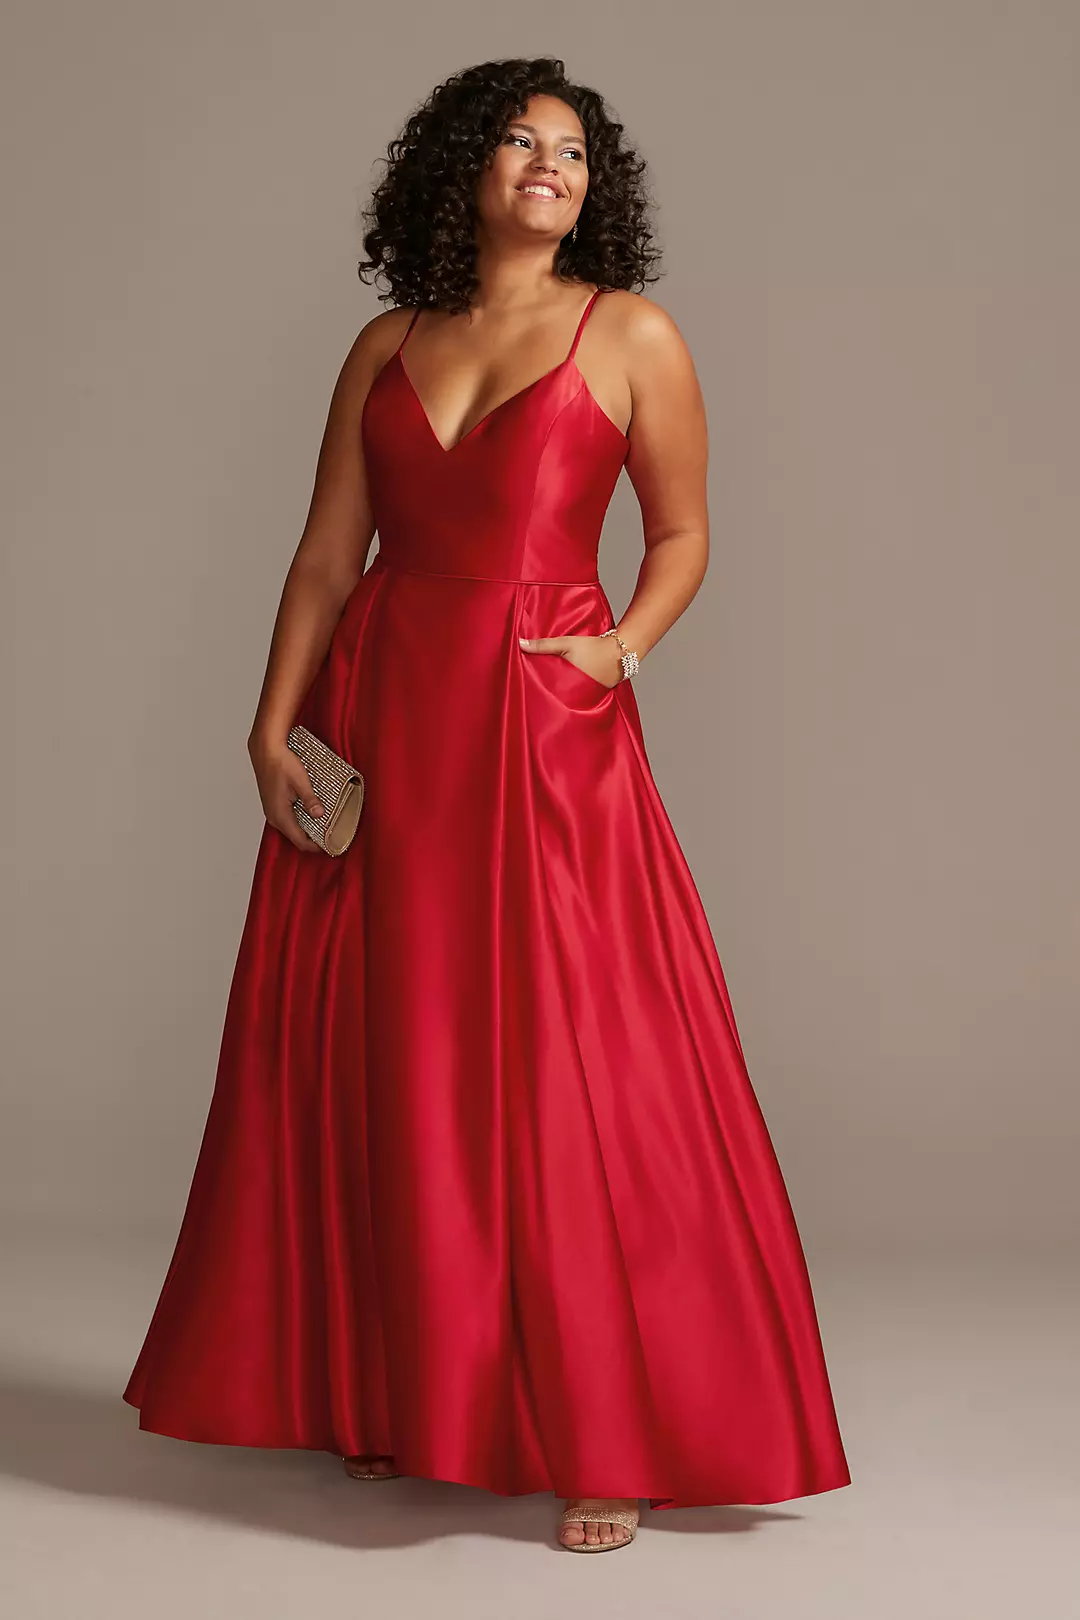 Satin Spaghetti Strap Ball Gown with Pockets Image